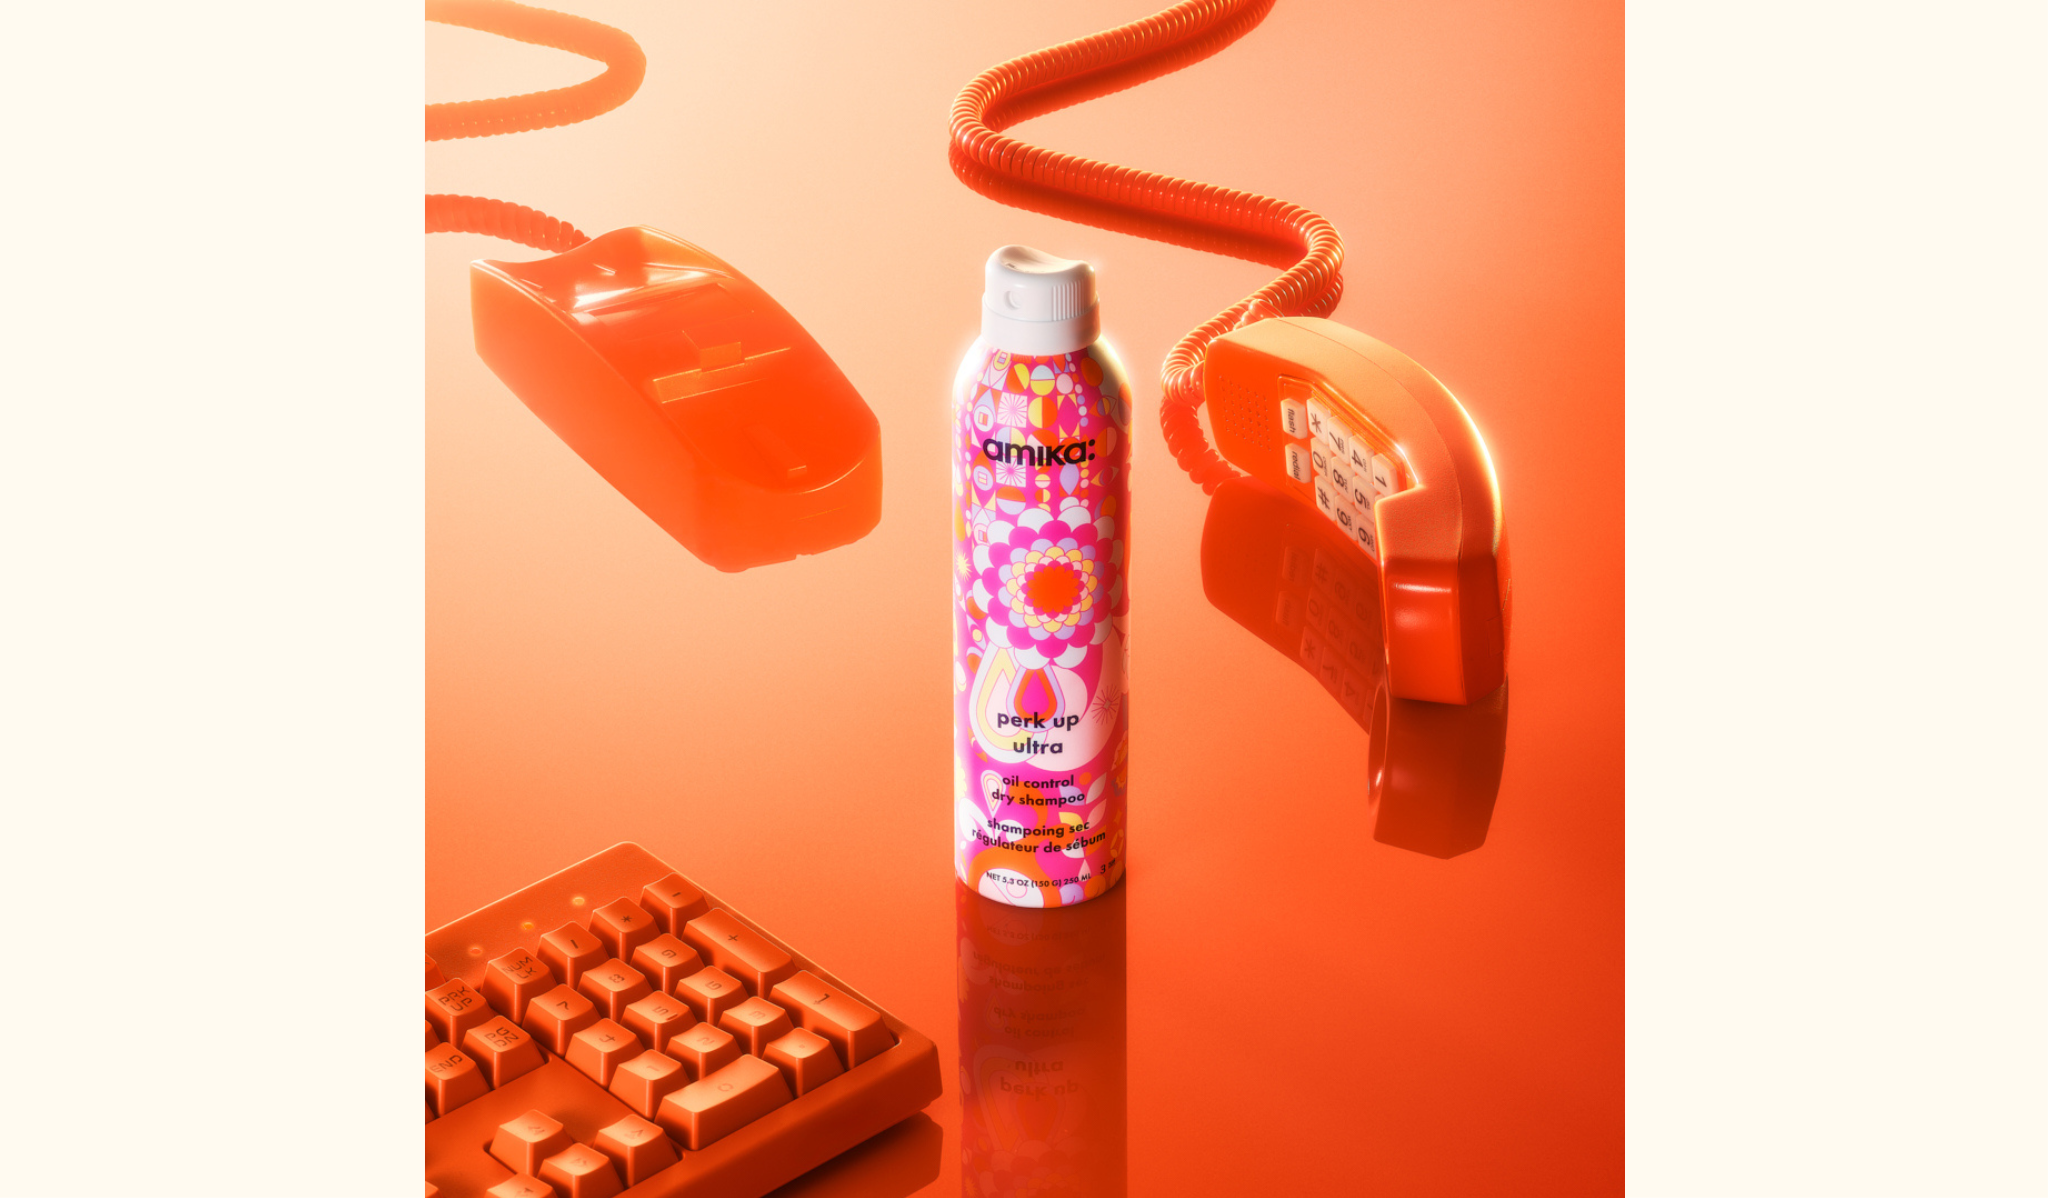 stylized image of a telephone, keyboard and amika's new perk up ultra oil control dry shampoo 5.3 oz bottle